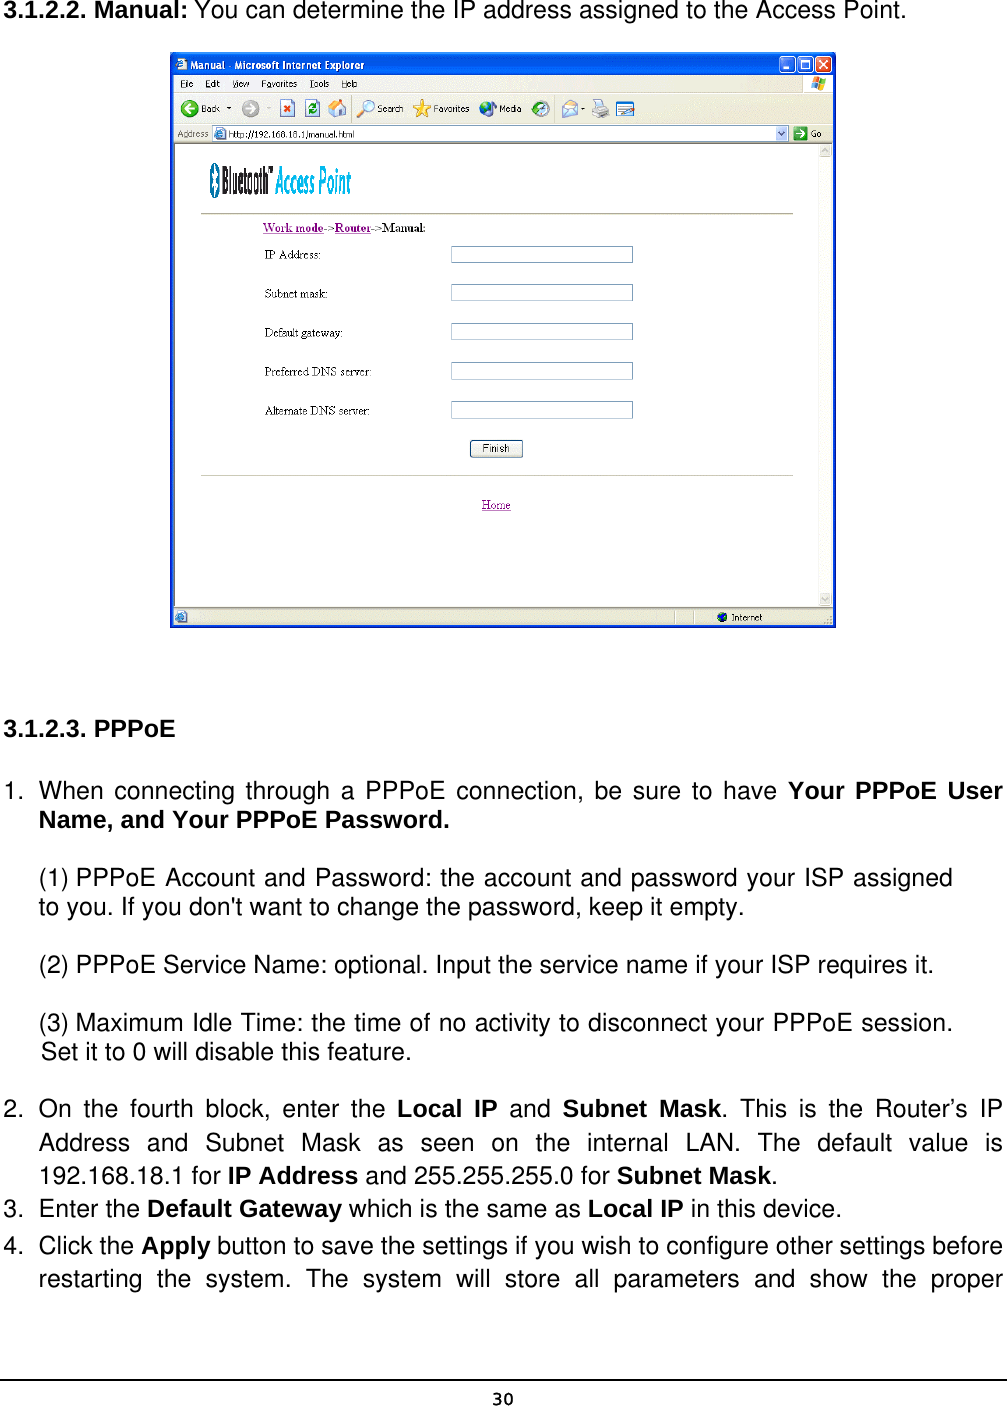   30 3.1.2.2. Manual: You can determine the IP address assigned to the Access Point.   3.1.2.3. PPPoE 1.  When connecting through a PPPoE connection, be sure to have Your PPPoE User Name, and Your PPPoE Password. (1) PPPoE Account and Password: the account and password your ISP assigned to you. If you don&apos;t want to change the password, keep it empty. (2) PPPoE Service Name: optional. Input the service name if your ISP requires it. (3) Maximum Idle Time: the time of no activity to disconnect your PPPoE session. Set it to 0 will disable this feature. 2. On the fourth block, enter the Local IP and Subnet Mask. This is the Router’s IP Address and Subnet Mask as seen on the internal LAN. The default value is 192.168.18.1 for IP Address and 255.255.255.0 for Subnet Mask. 3.   Enter the Default Gateway which is the same as Local IP in this device. 4. Click the Apply button to save the settings if you wish to configure other settings before restarting the system. The system will store all parameters and show the proper 